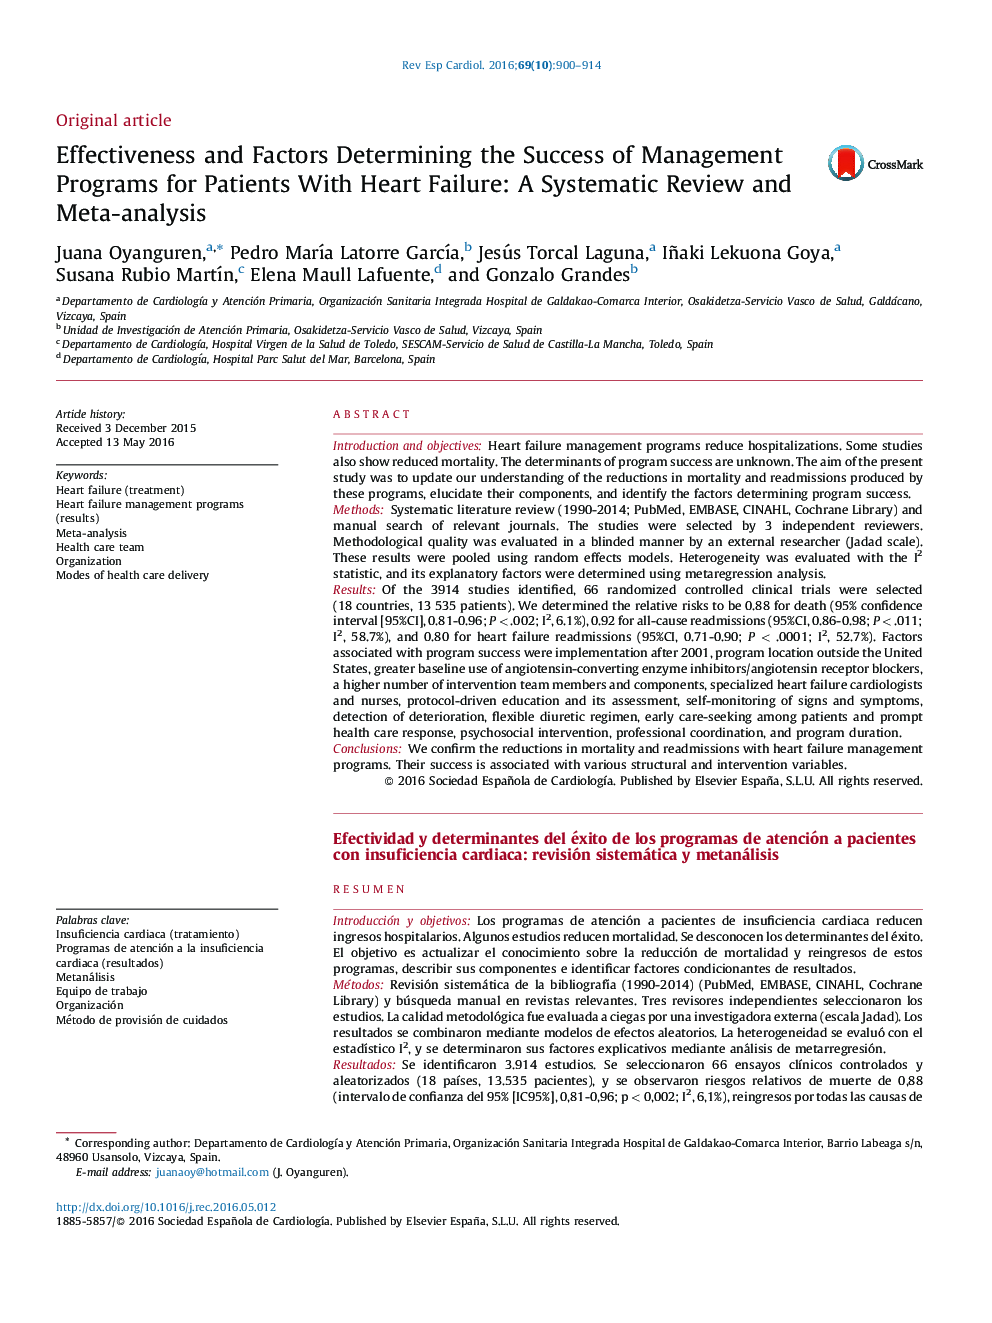 Effectiveness and Factors Determining the Success of Management Programs for Patients With Heart Failure: A Systematic Review and Meta-analysis